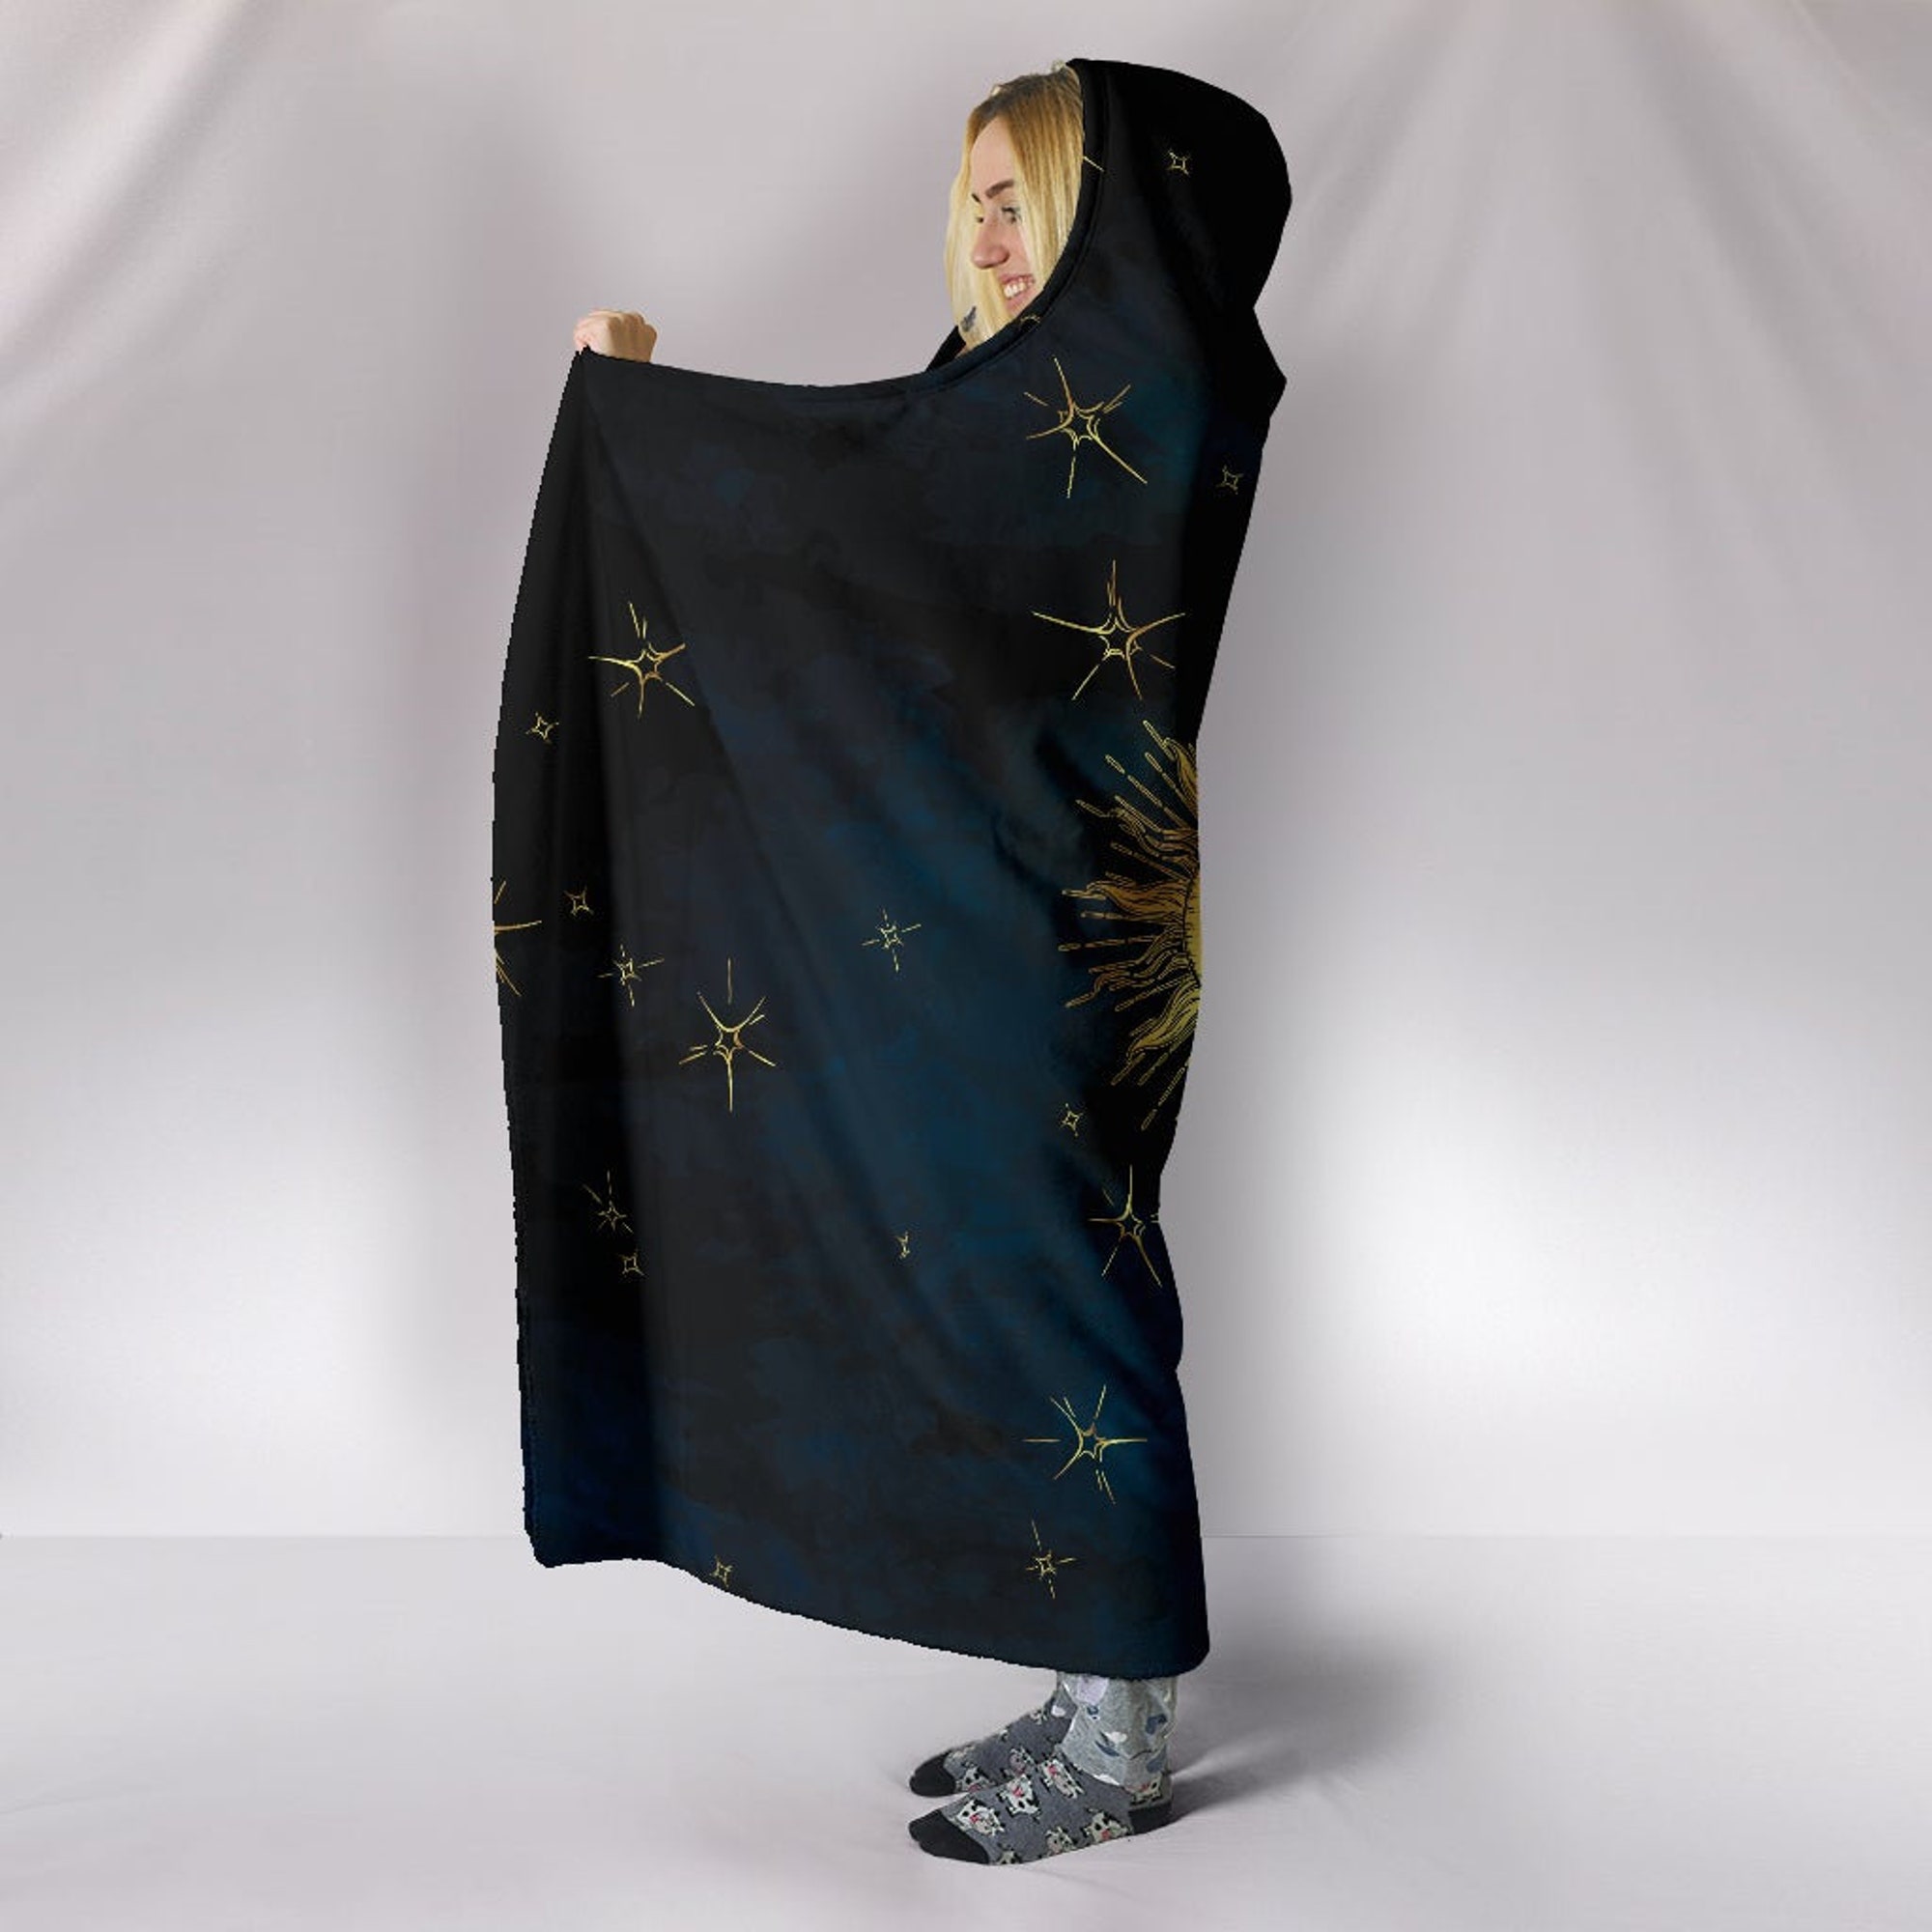 Golden Sun and Moon Hooded Blanket - Meditation, Soft Wearable Blanket Hoodie, Stars Clouds Cozy Throw, Esoteric Style, Crescent Moon Symbol